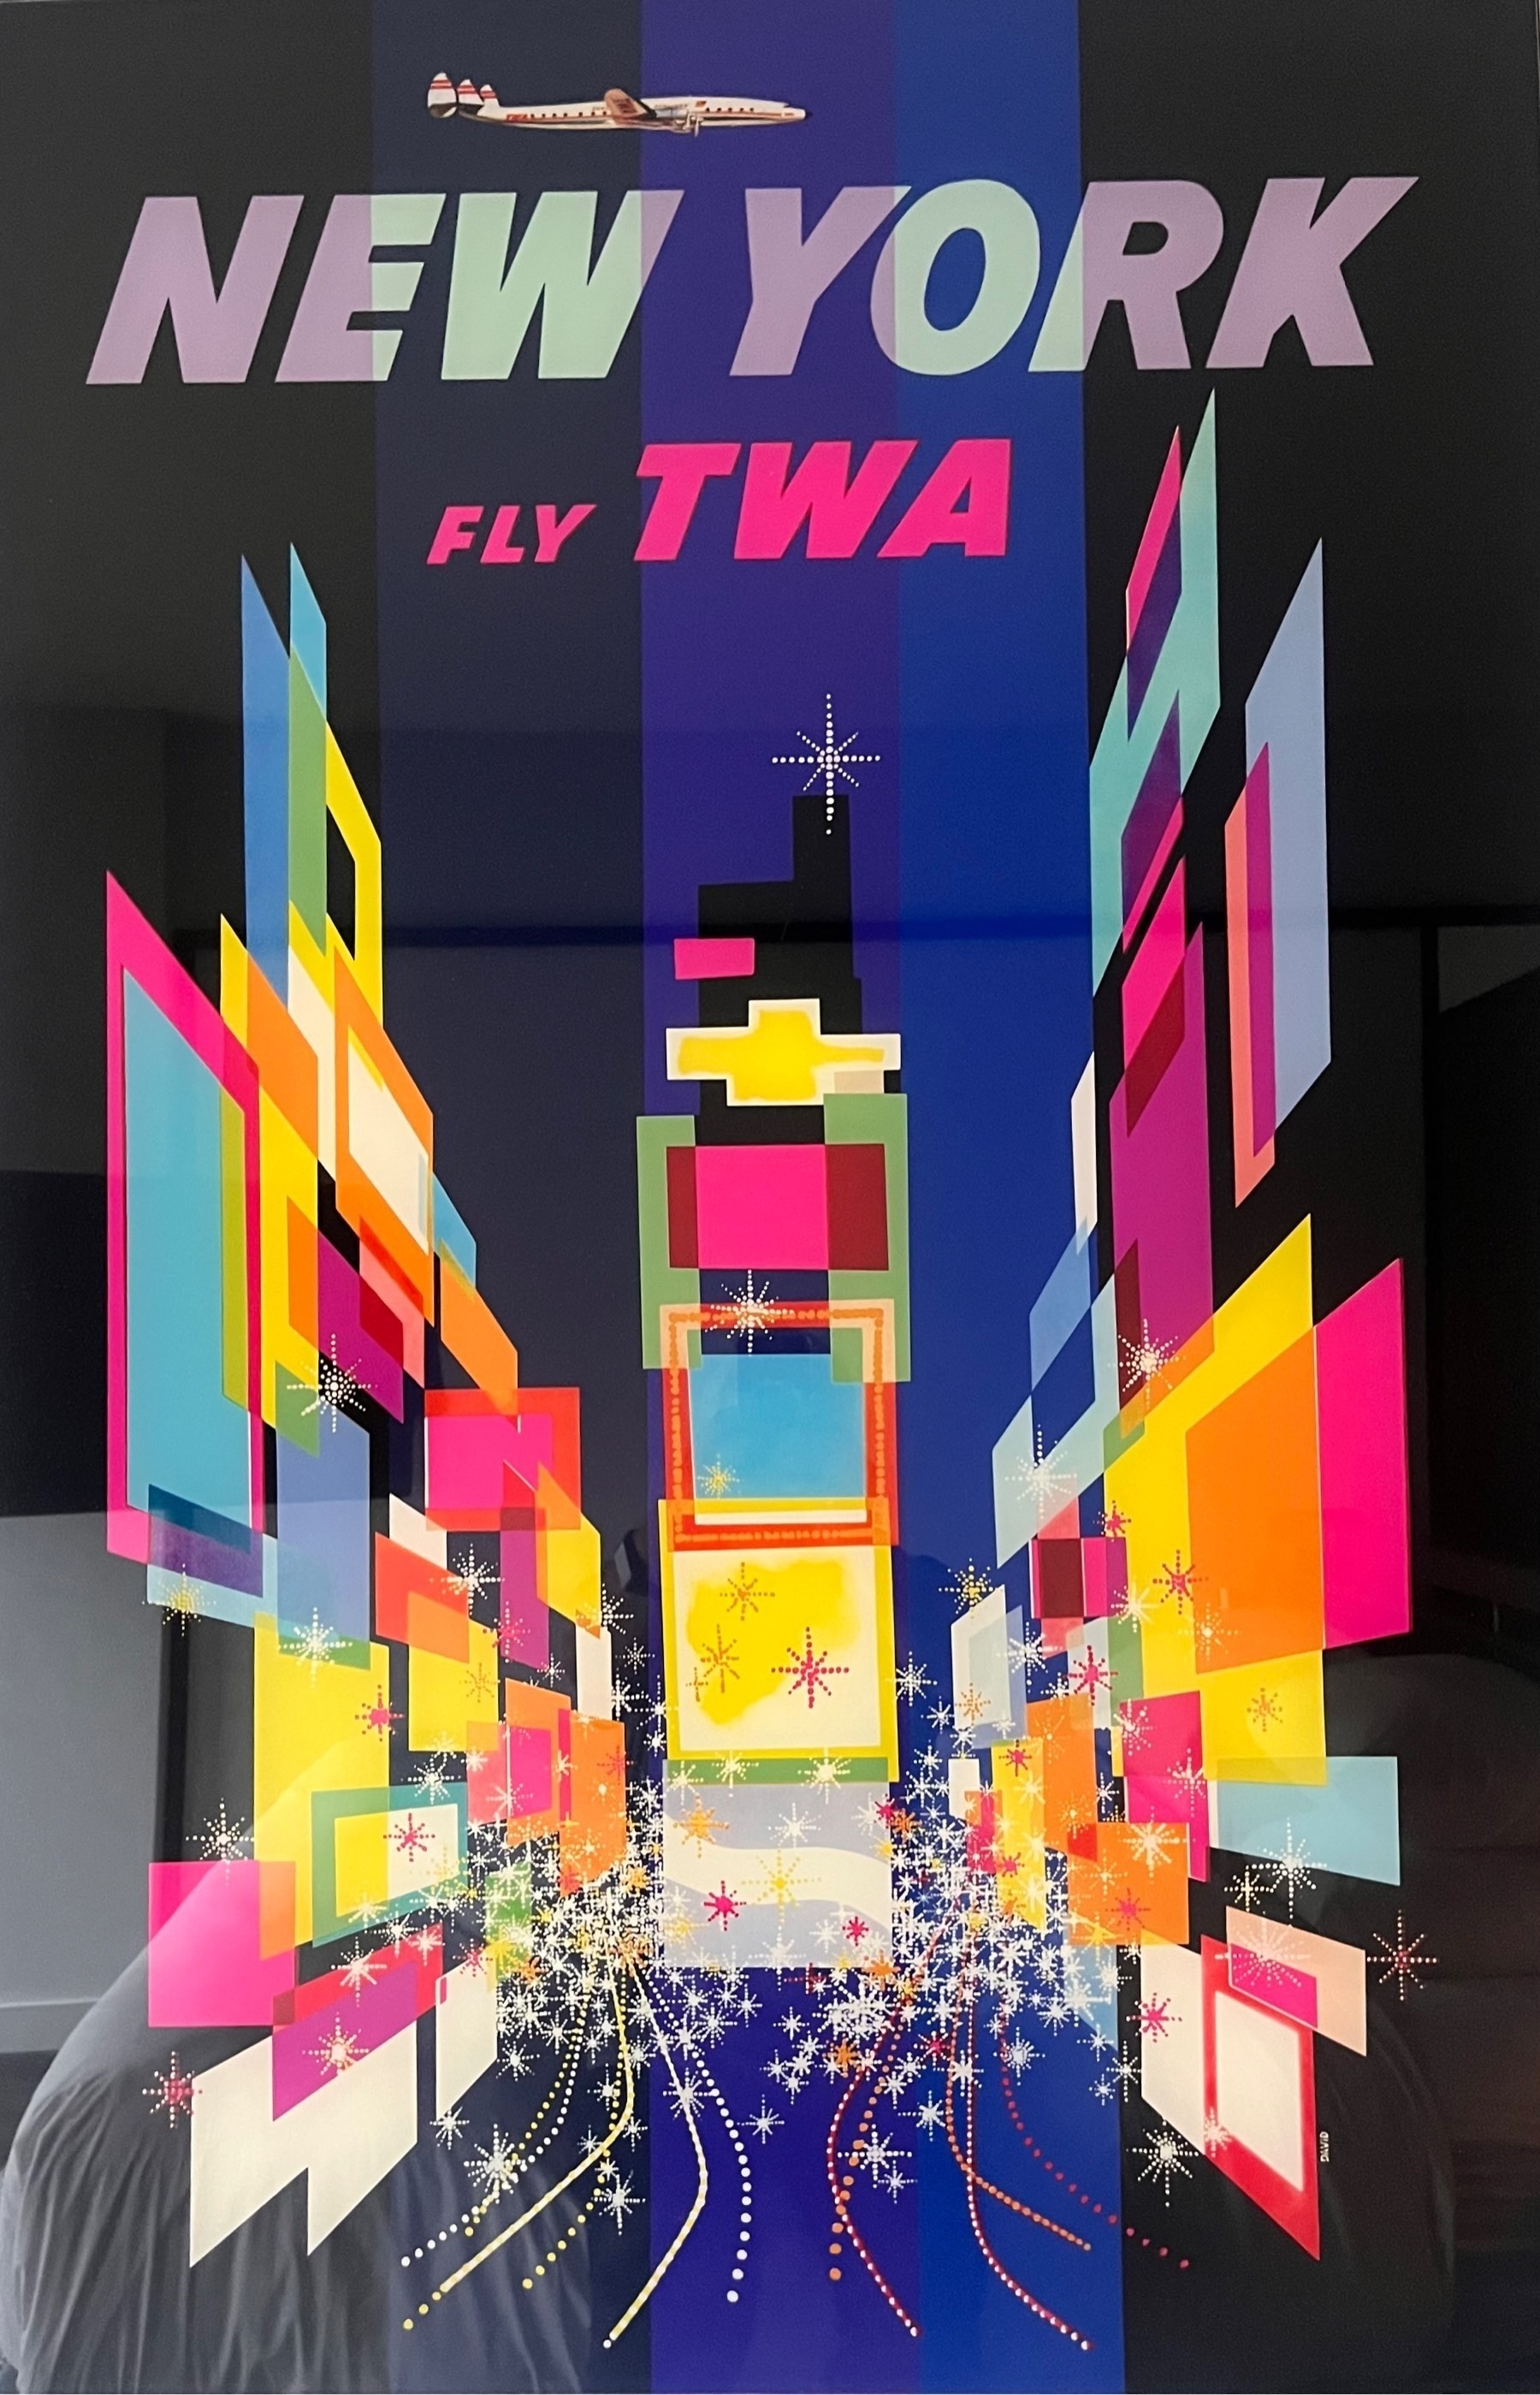 Abstract image of New York City for the TWA Hotel, modeled on the 1960’s